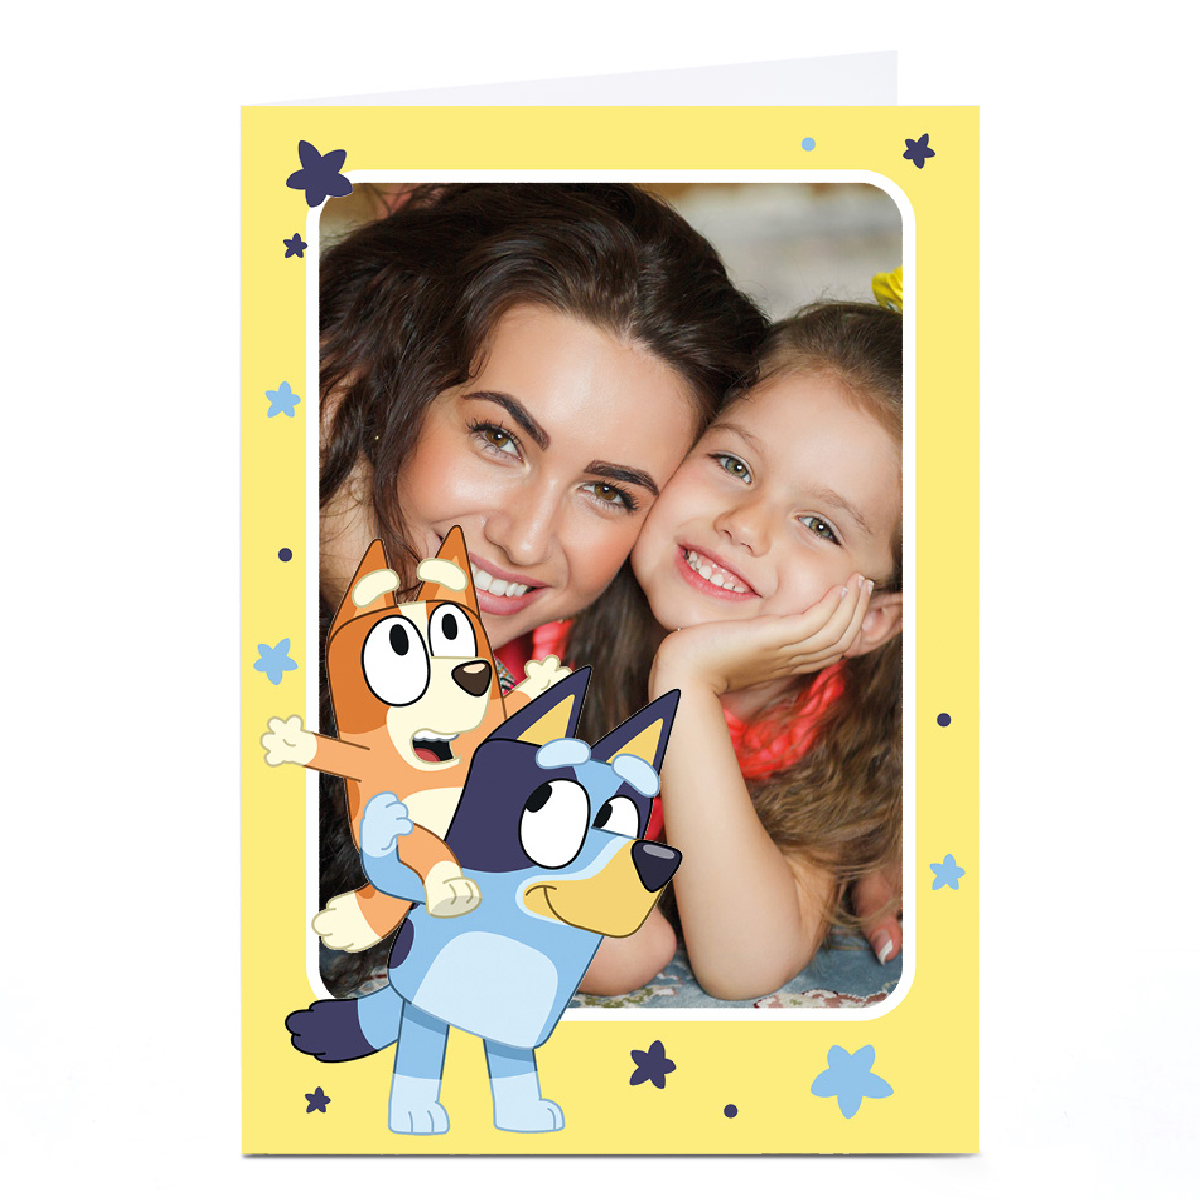  Personalised Birthday Card - Bluey - Image Only